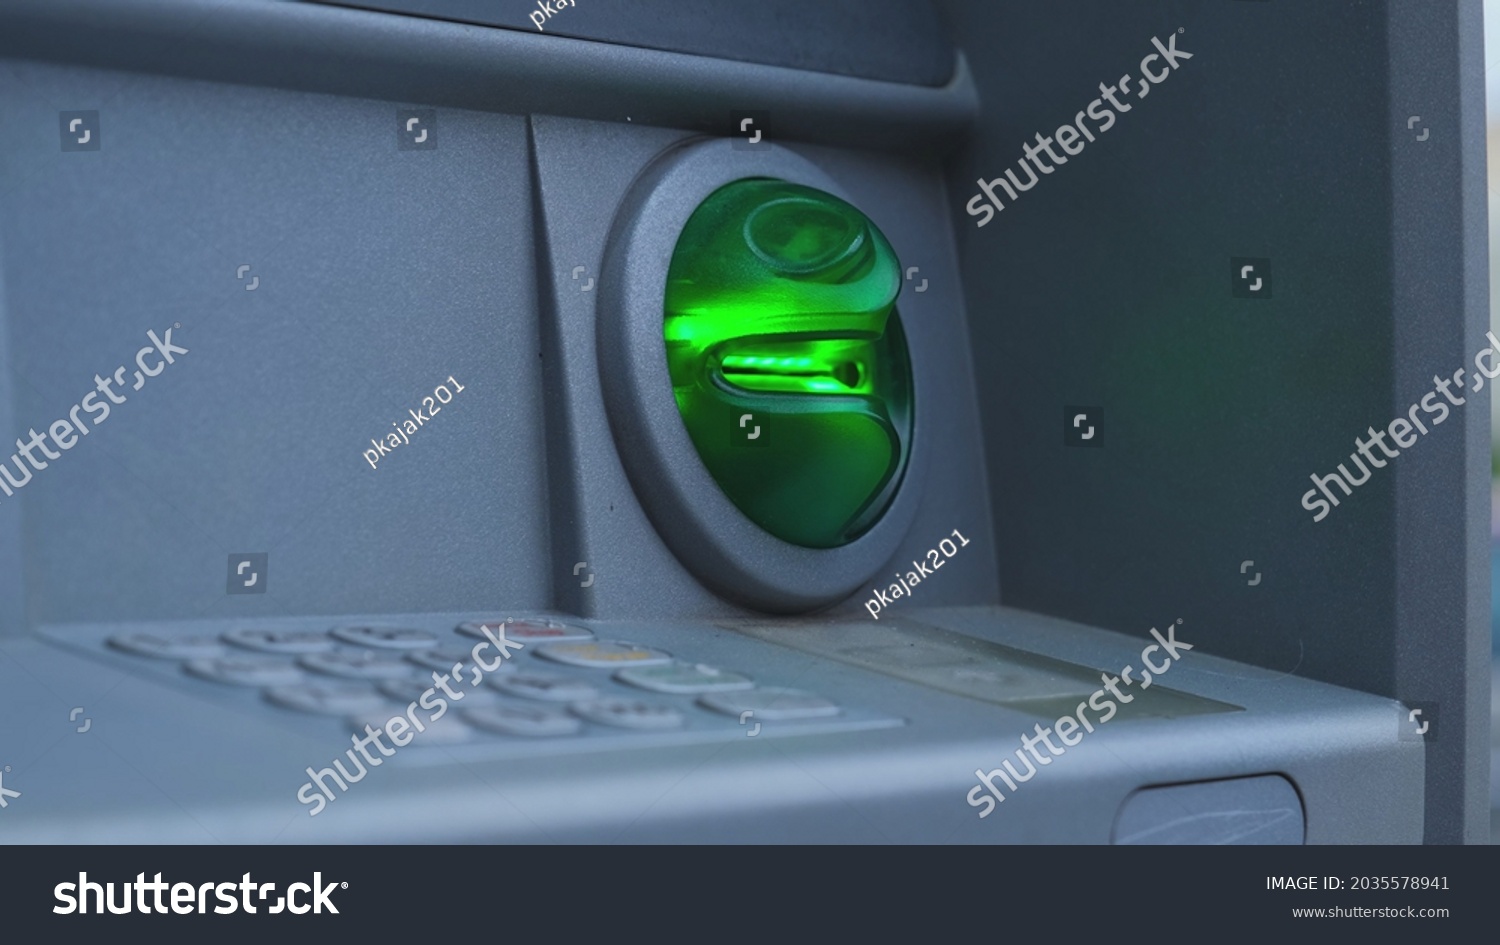 ATM Numeric Keyboard and Anti Skimming Anti Phishing Card Reader Slit Cover with Green Blinking LED #2035578941